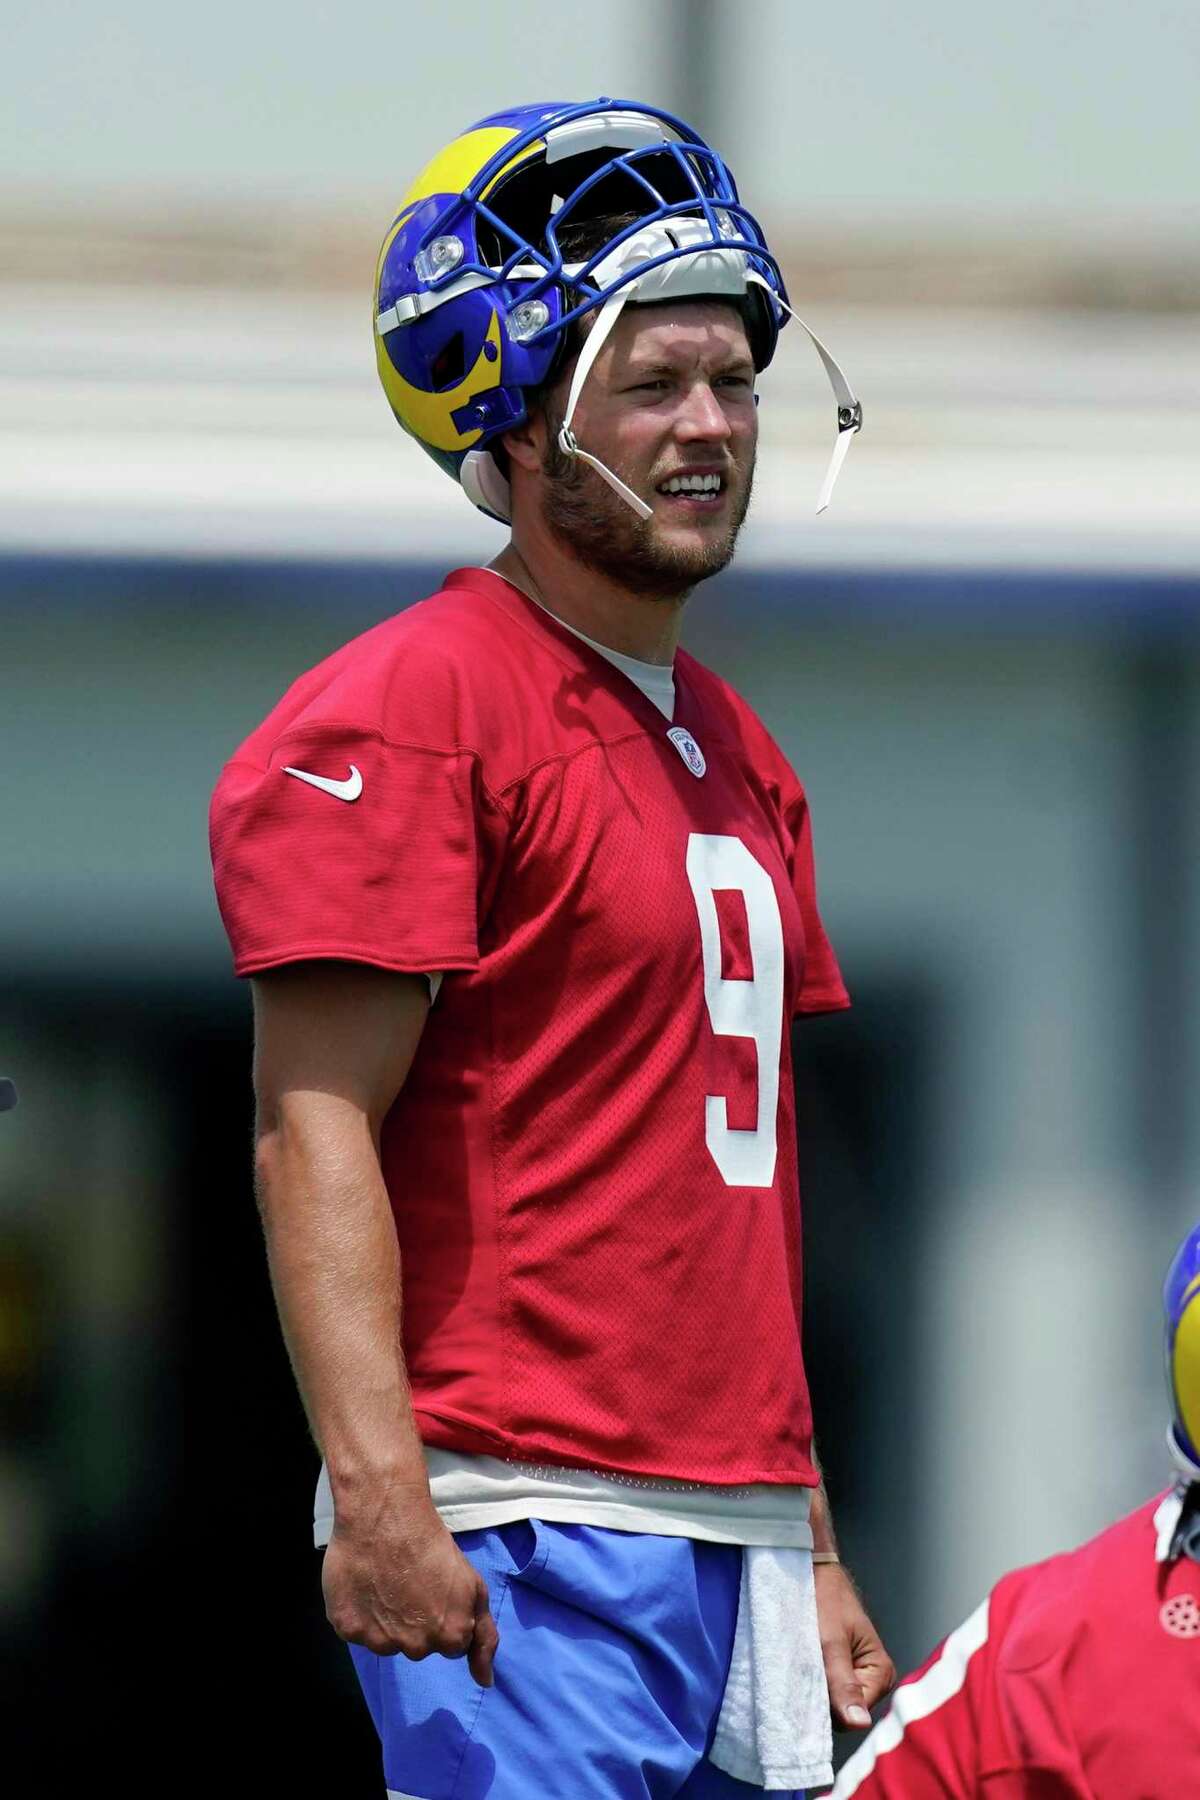 Los Angeles Rams quarterback Matthew Stafford stands on the field during an NFL football practice Tuesday, June 8, 2021, in Thousand Oaks, Calif. (AP Photo/Mark J. Terrill)